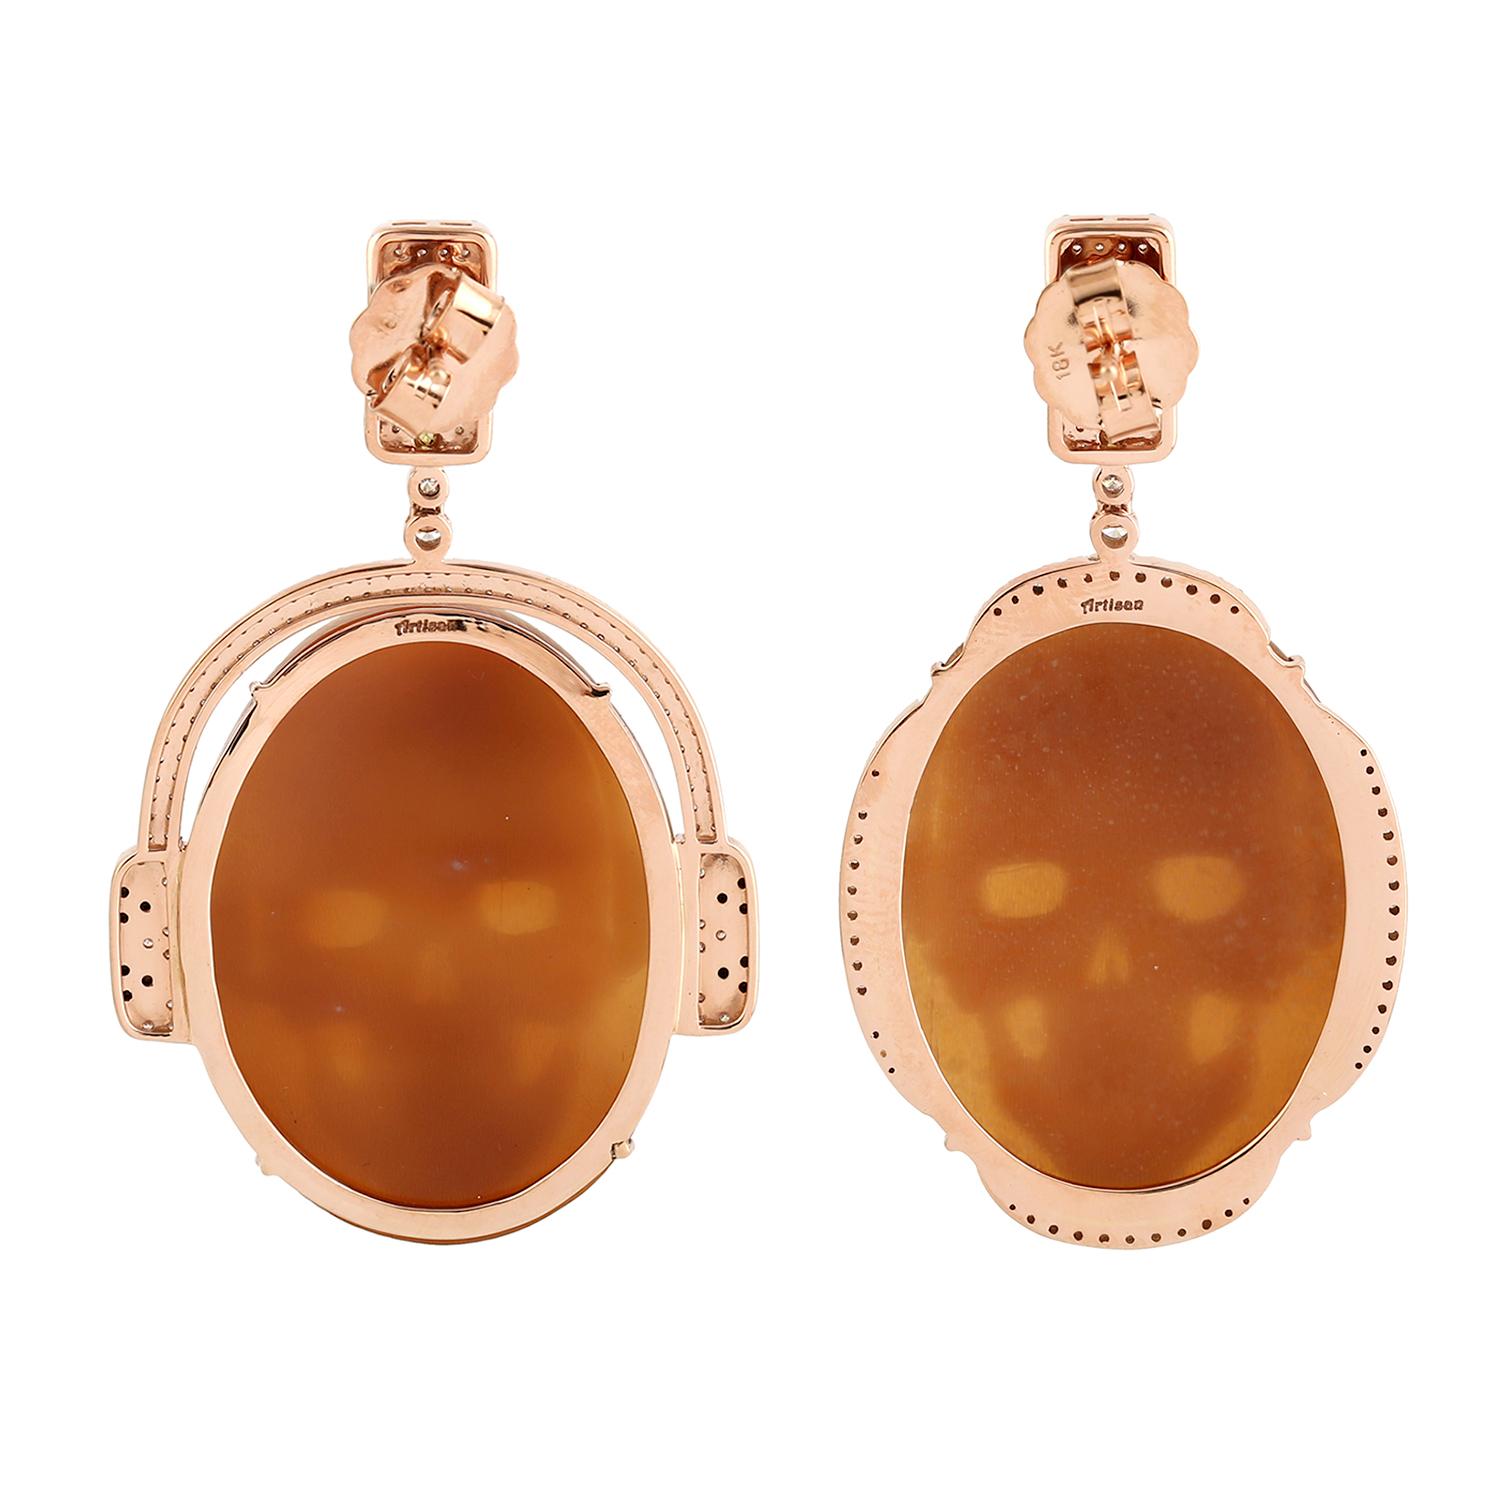 Carved Skull Sardonyx Earrings With Diamonds Made In 18k Rose Gold In New Condition For Sale In New York, NY